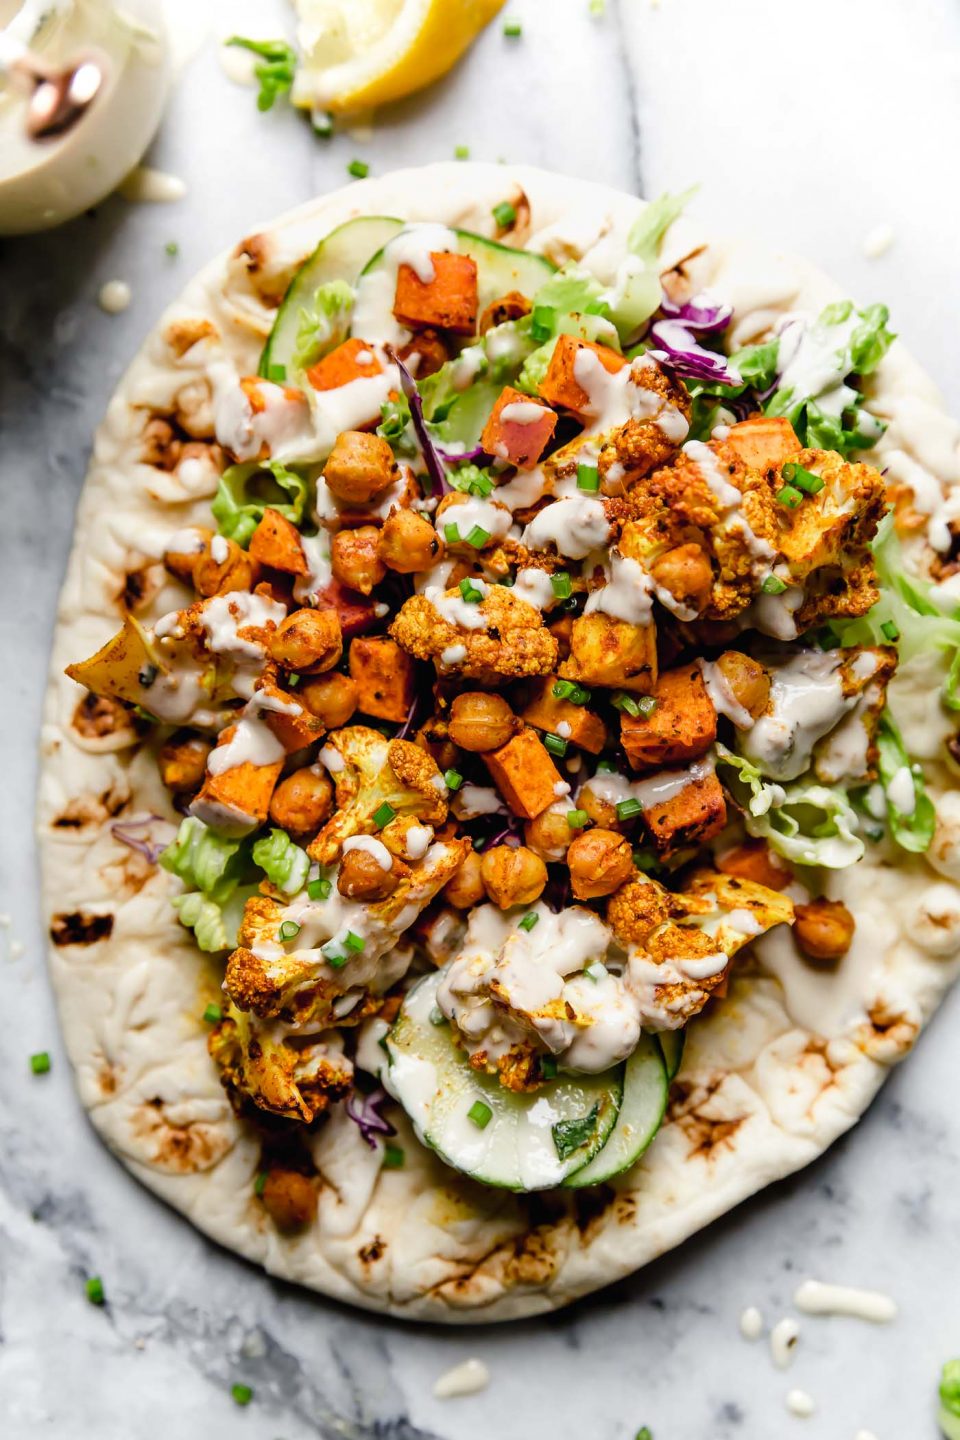 Chickpea & veggie shawarma served on a piece of naan bread. The bread is placed on a white marble surface, alongside lemon wedges & a jar of tahini sauce.